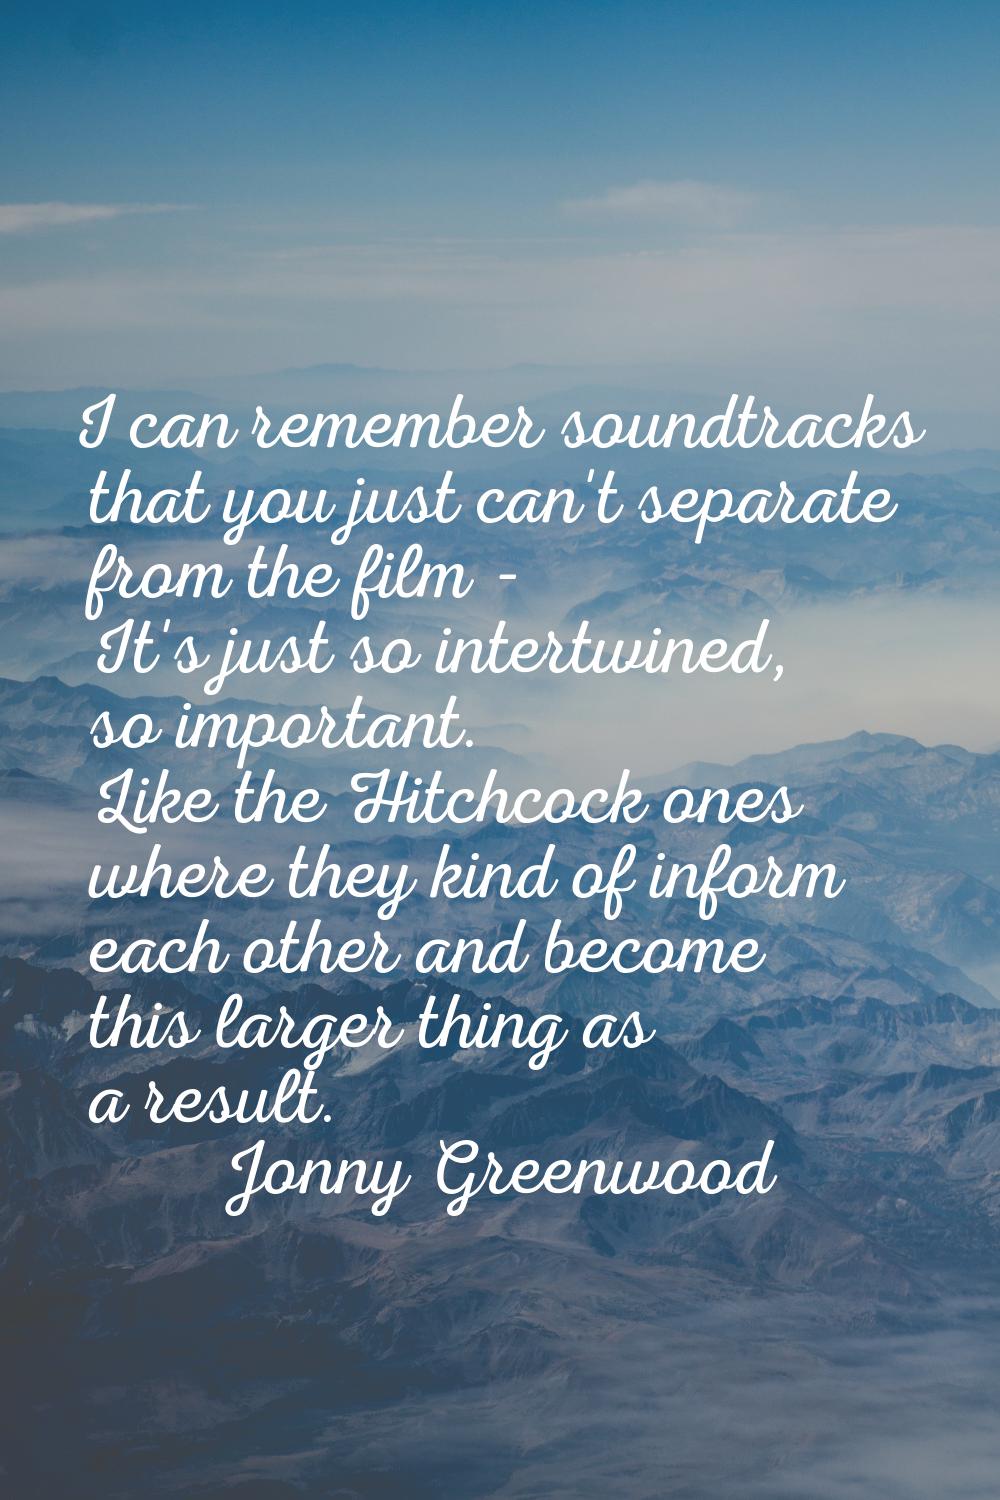 I can remember soundtracks that you just can't separate from the film - It's just so intertwined, s